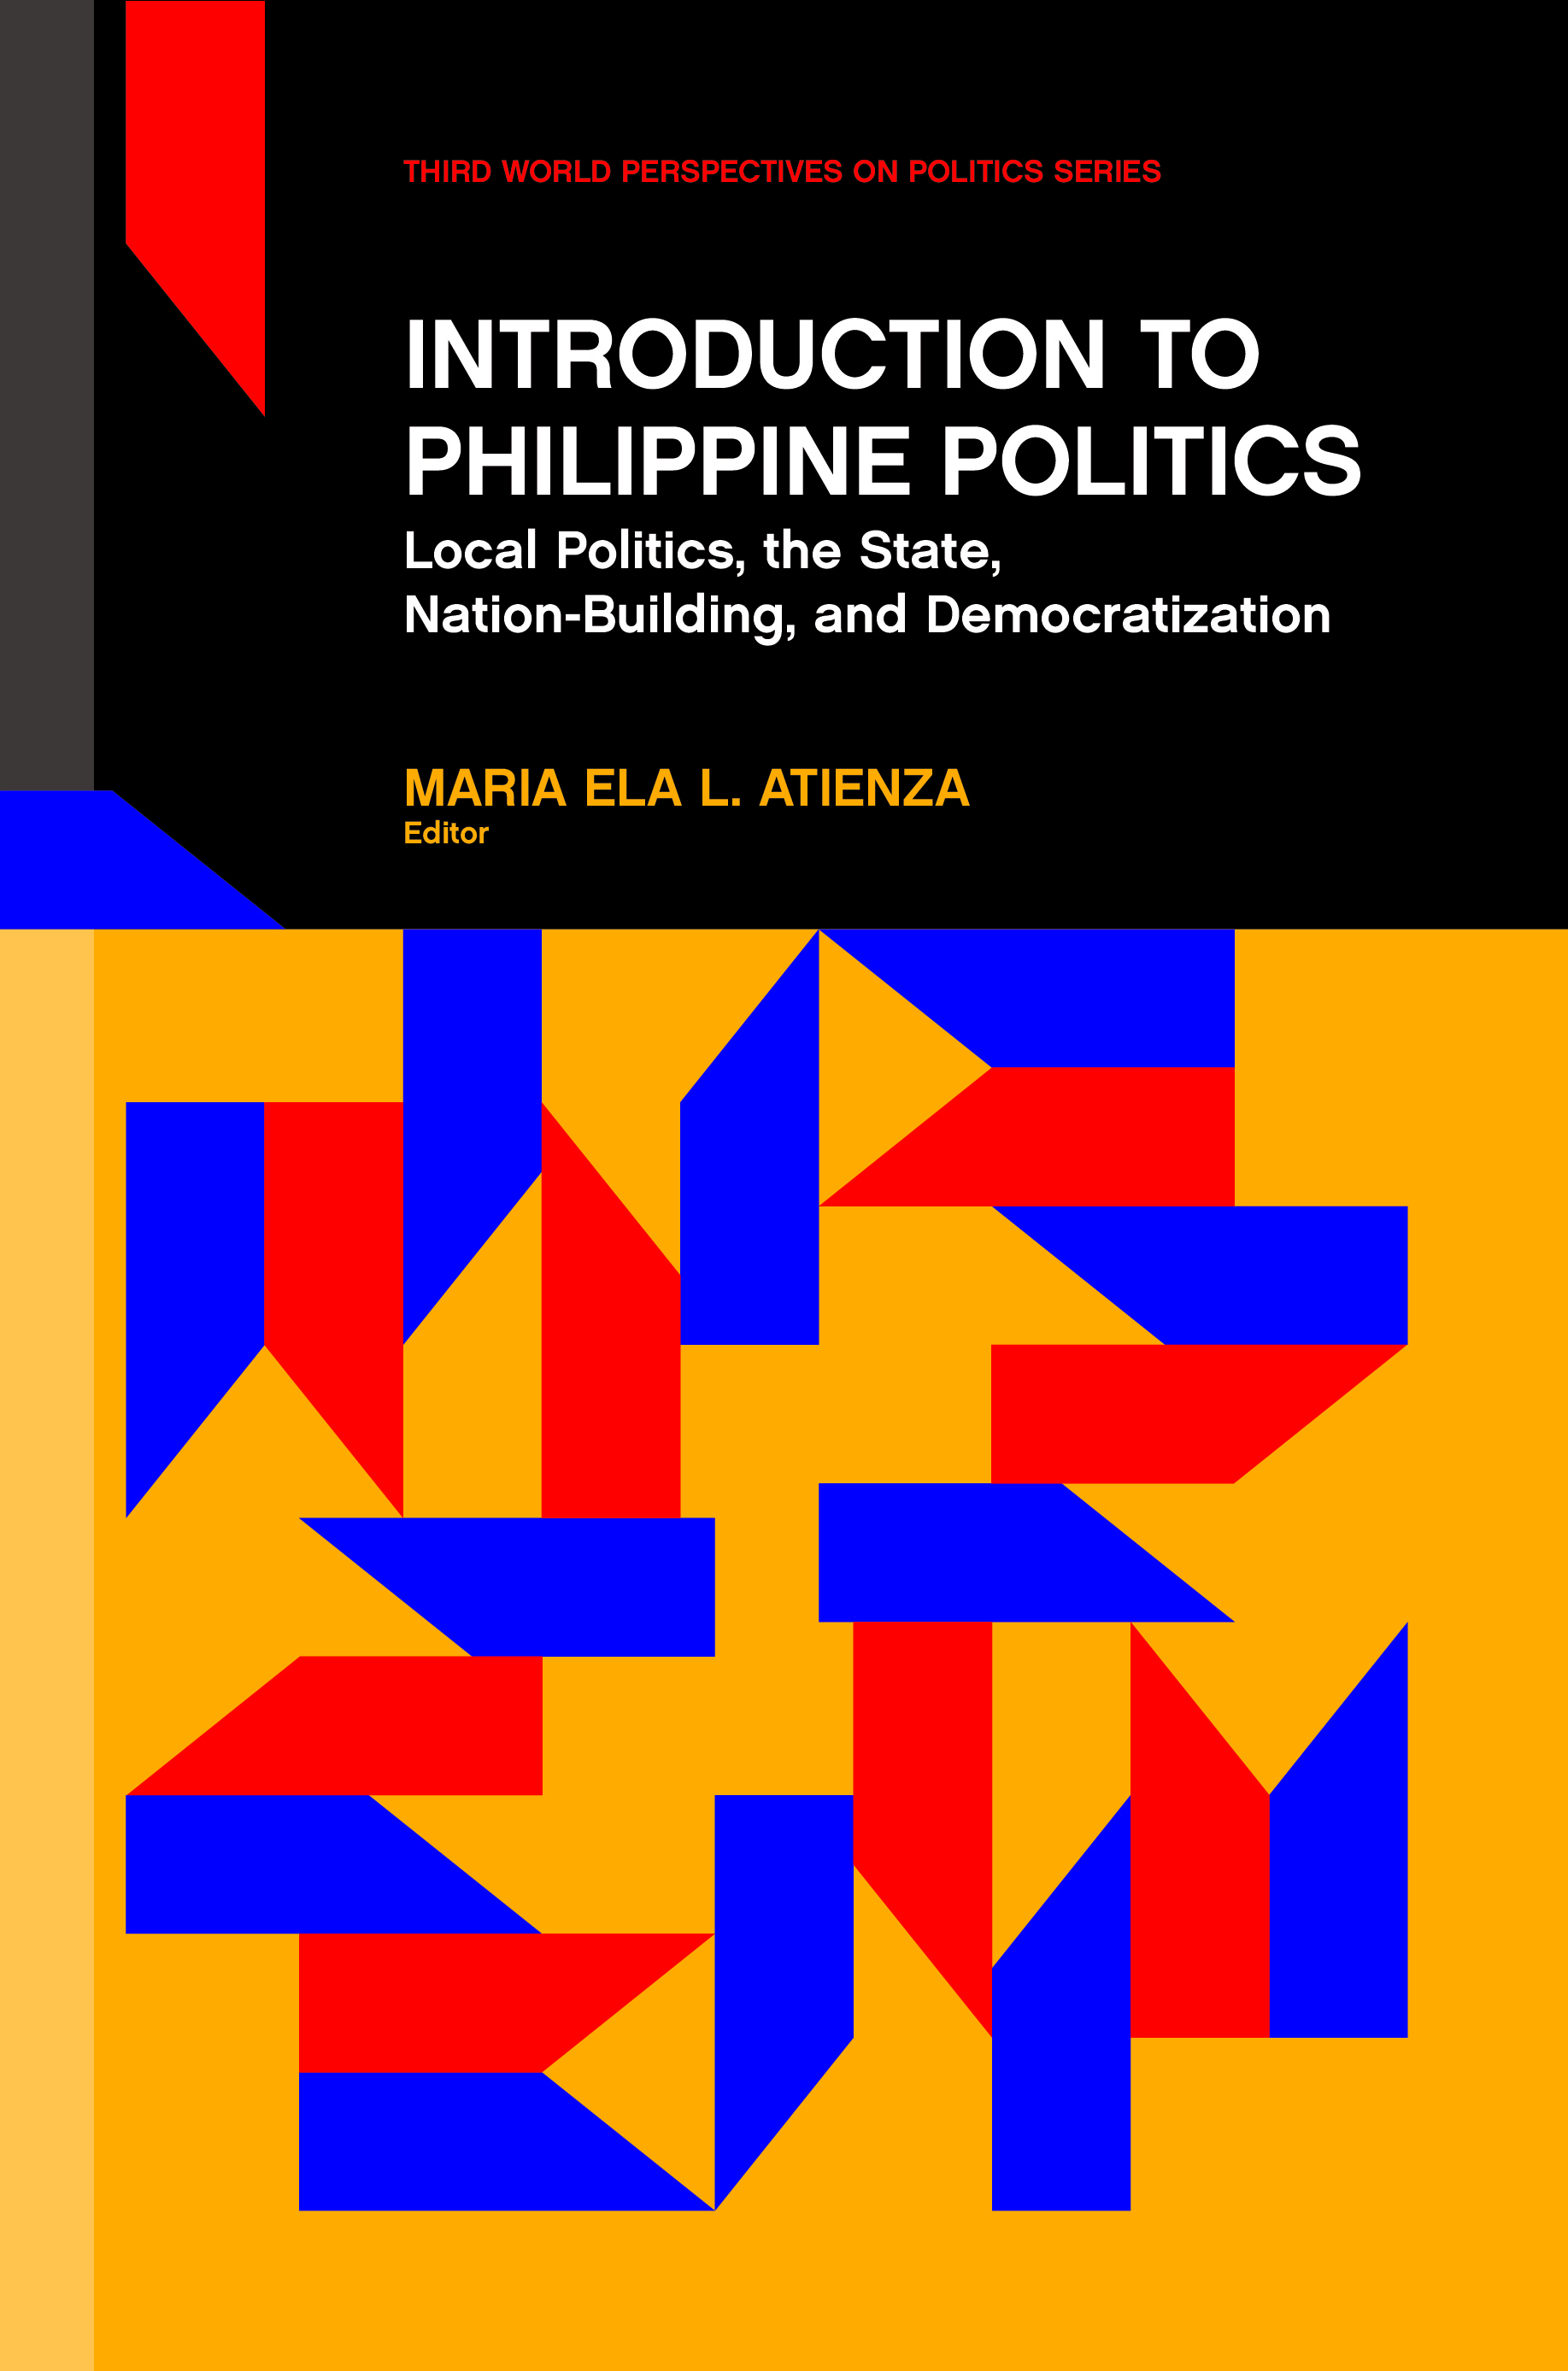 research topic politics in the philippines